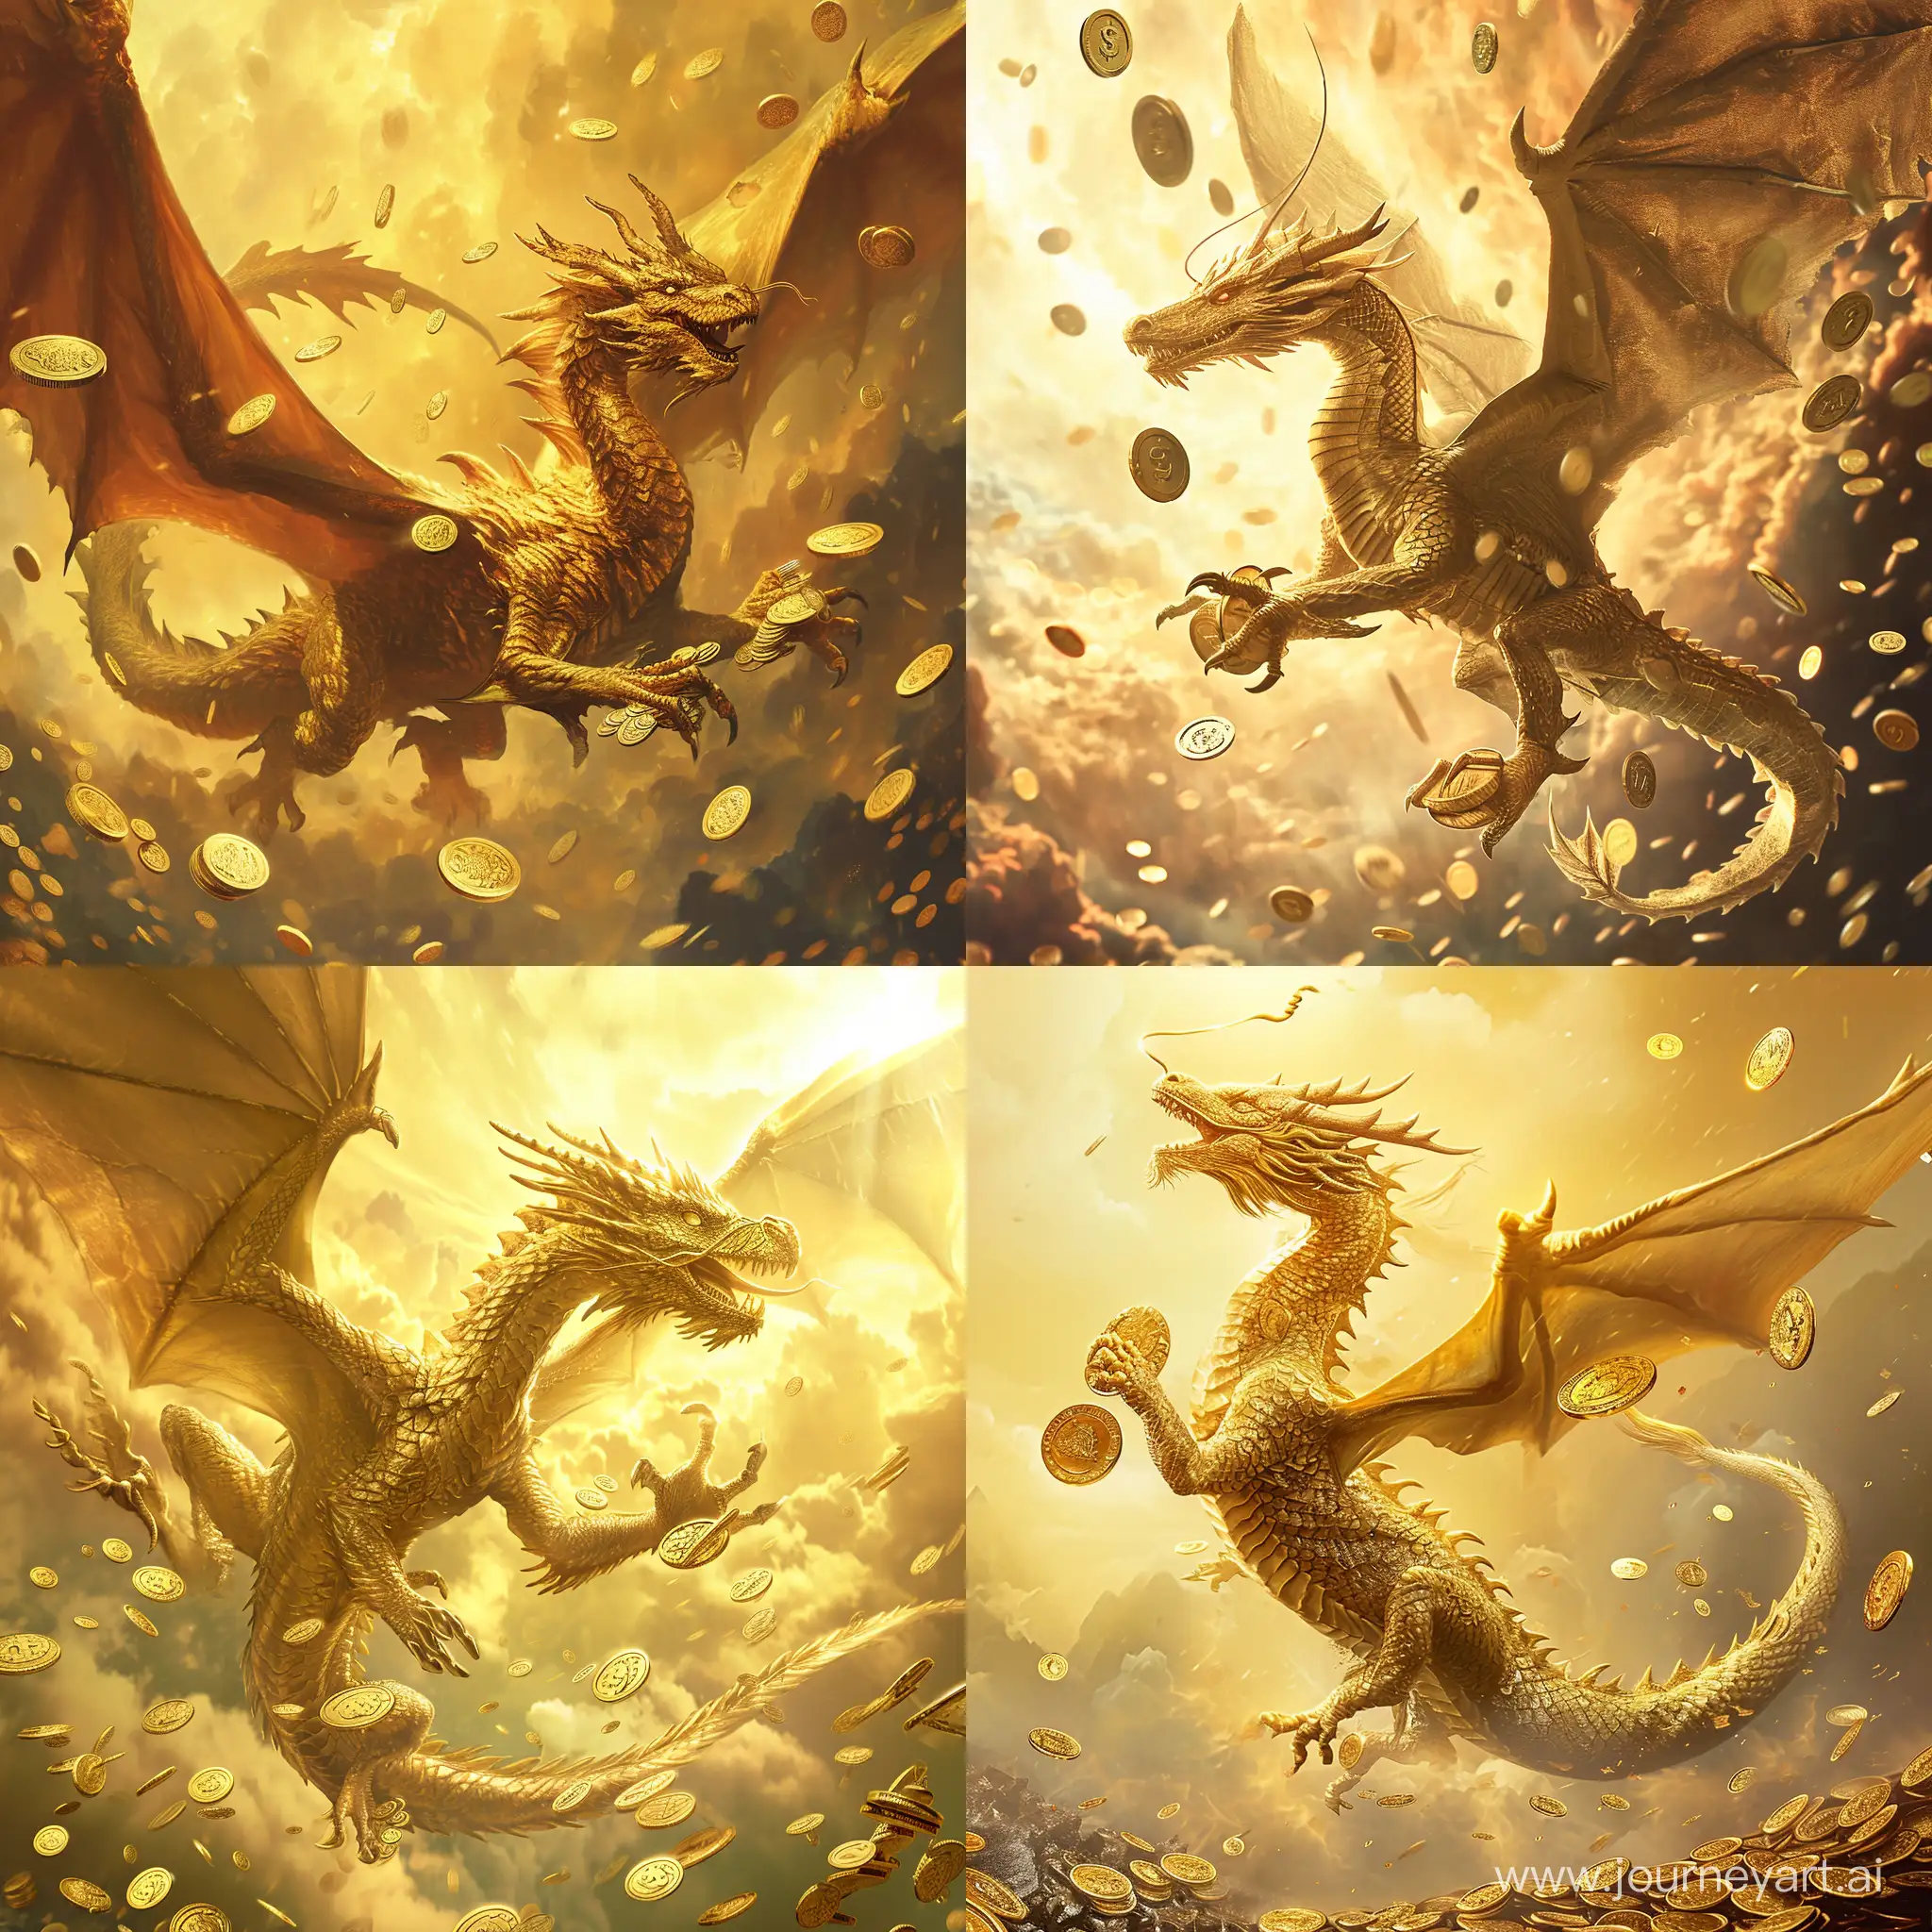 a golden dragon flying in the golden sky, his hands hold gold coins, surrounded by gold coins, realistic, --v 6